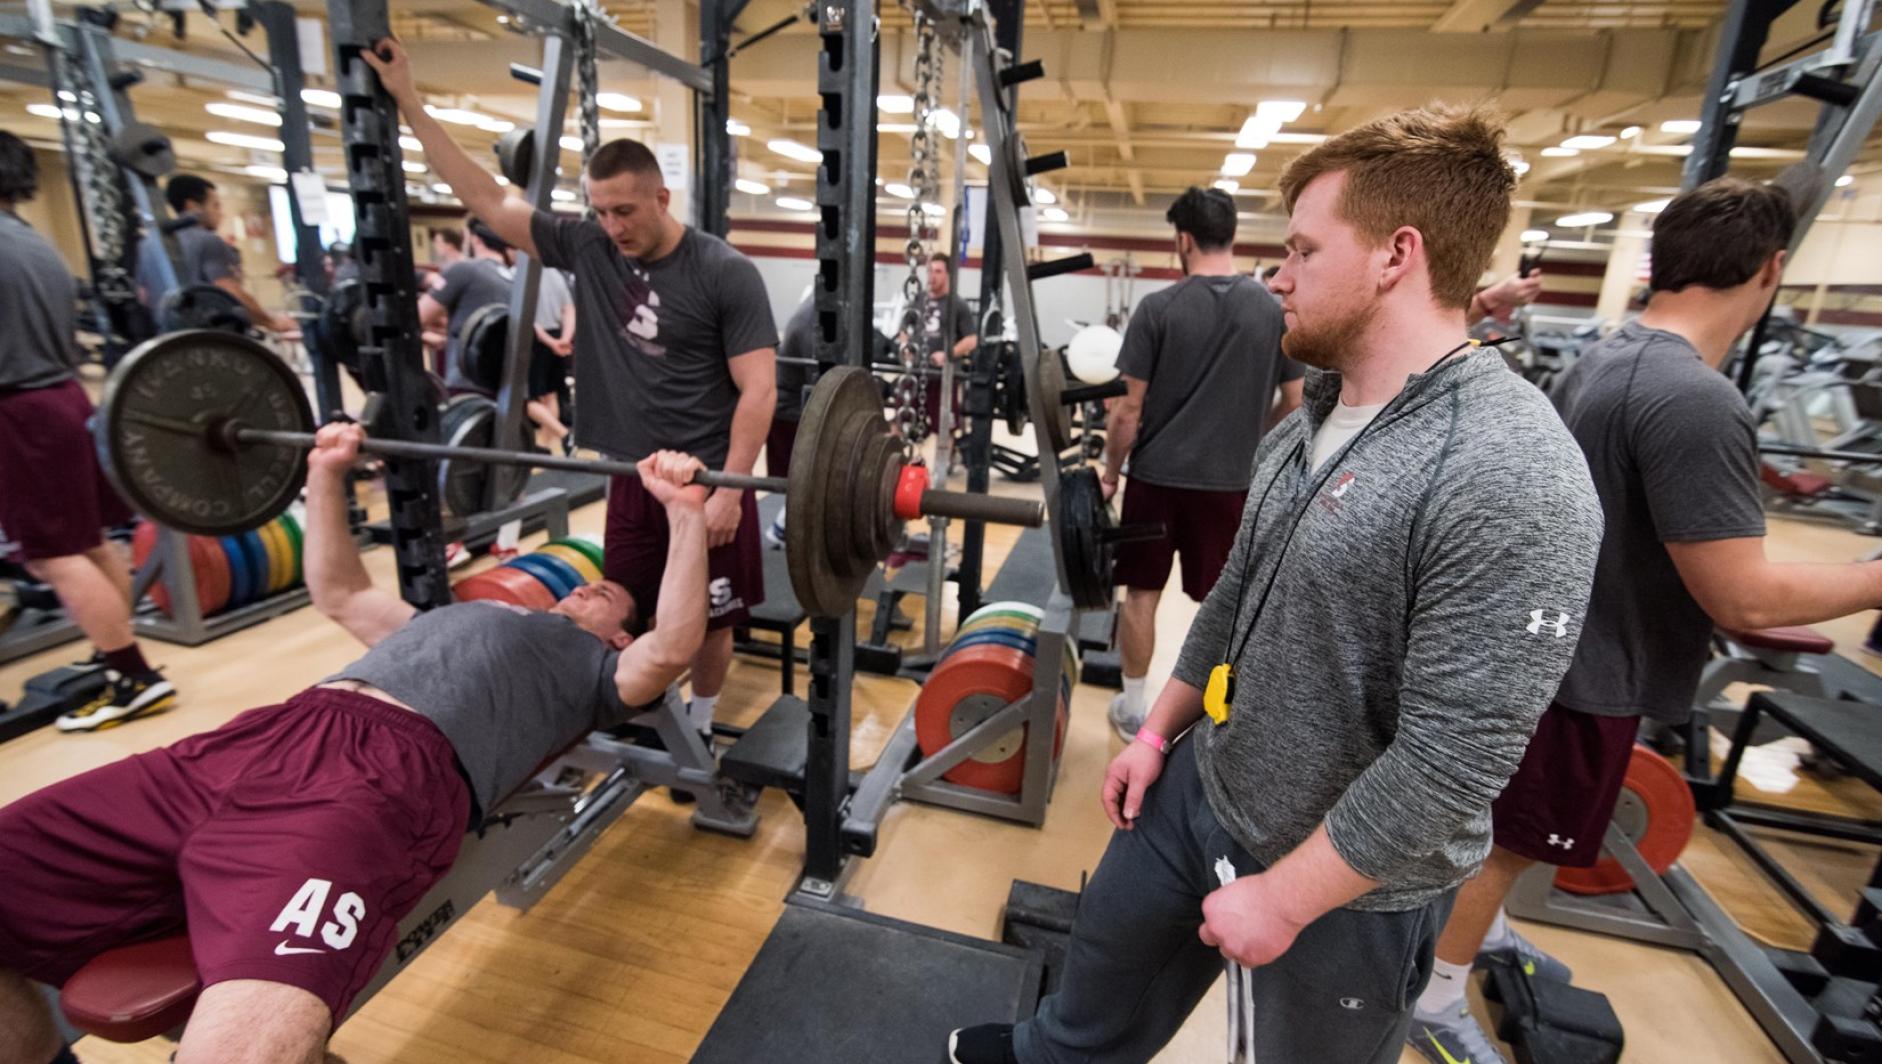 A student strength and conditioning coach looks on as his client does a chest press.